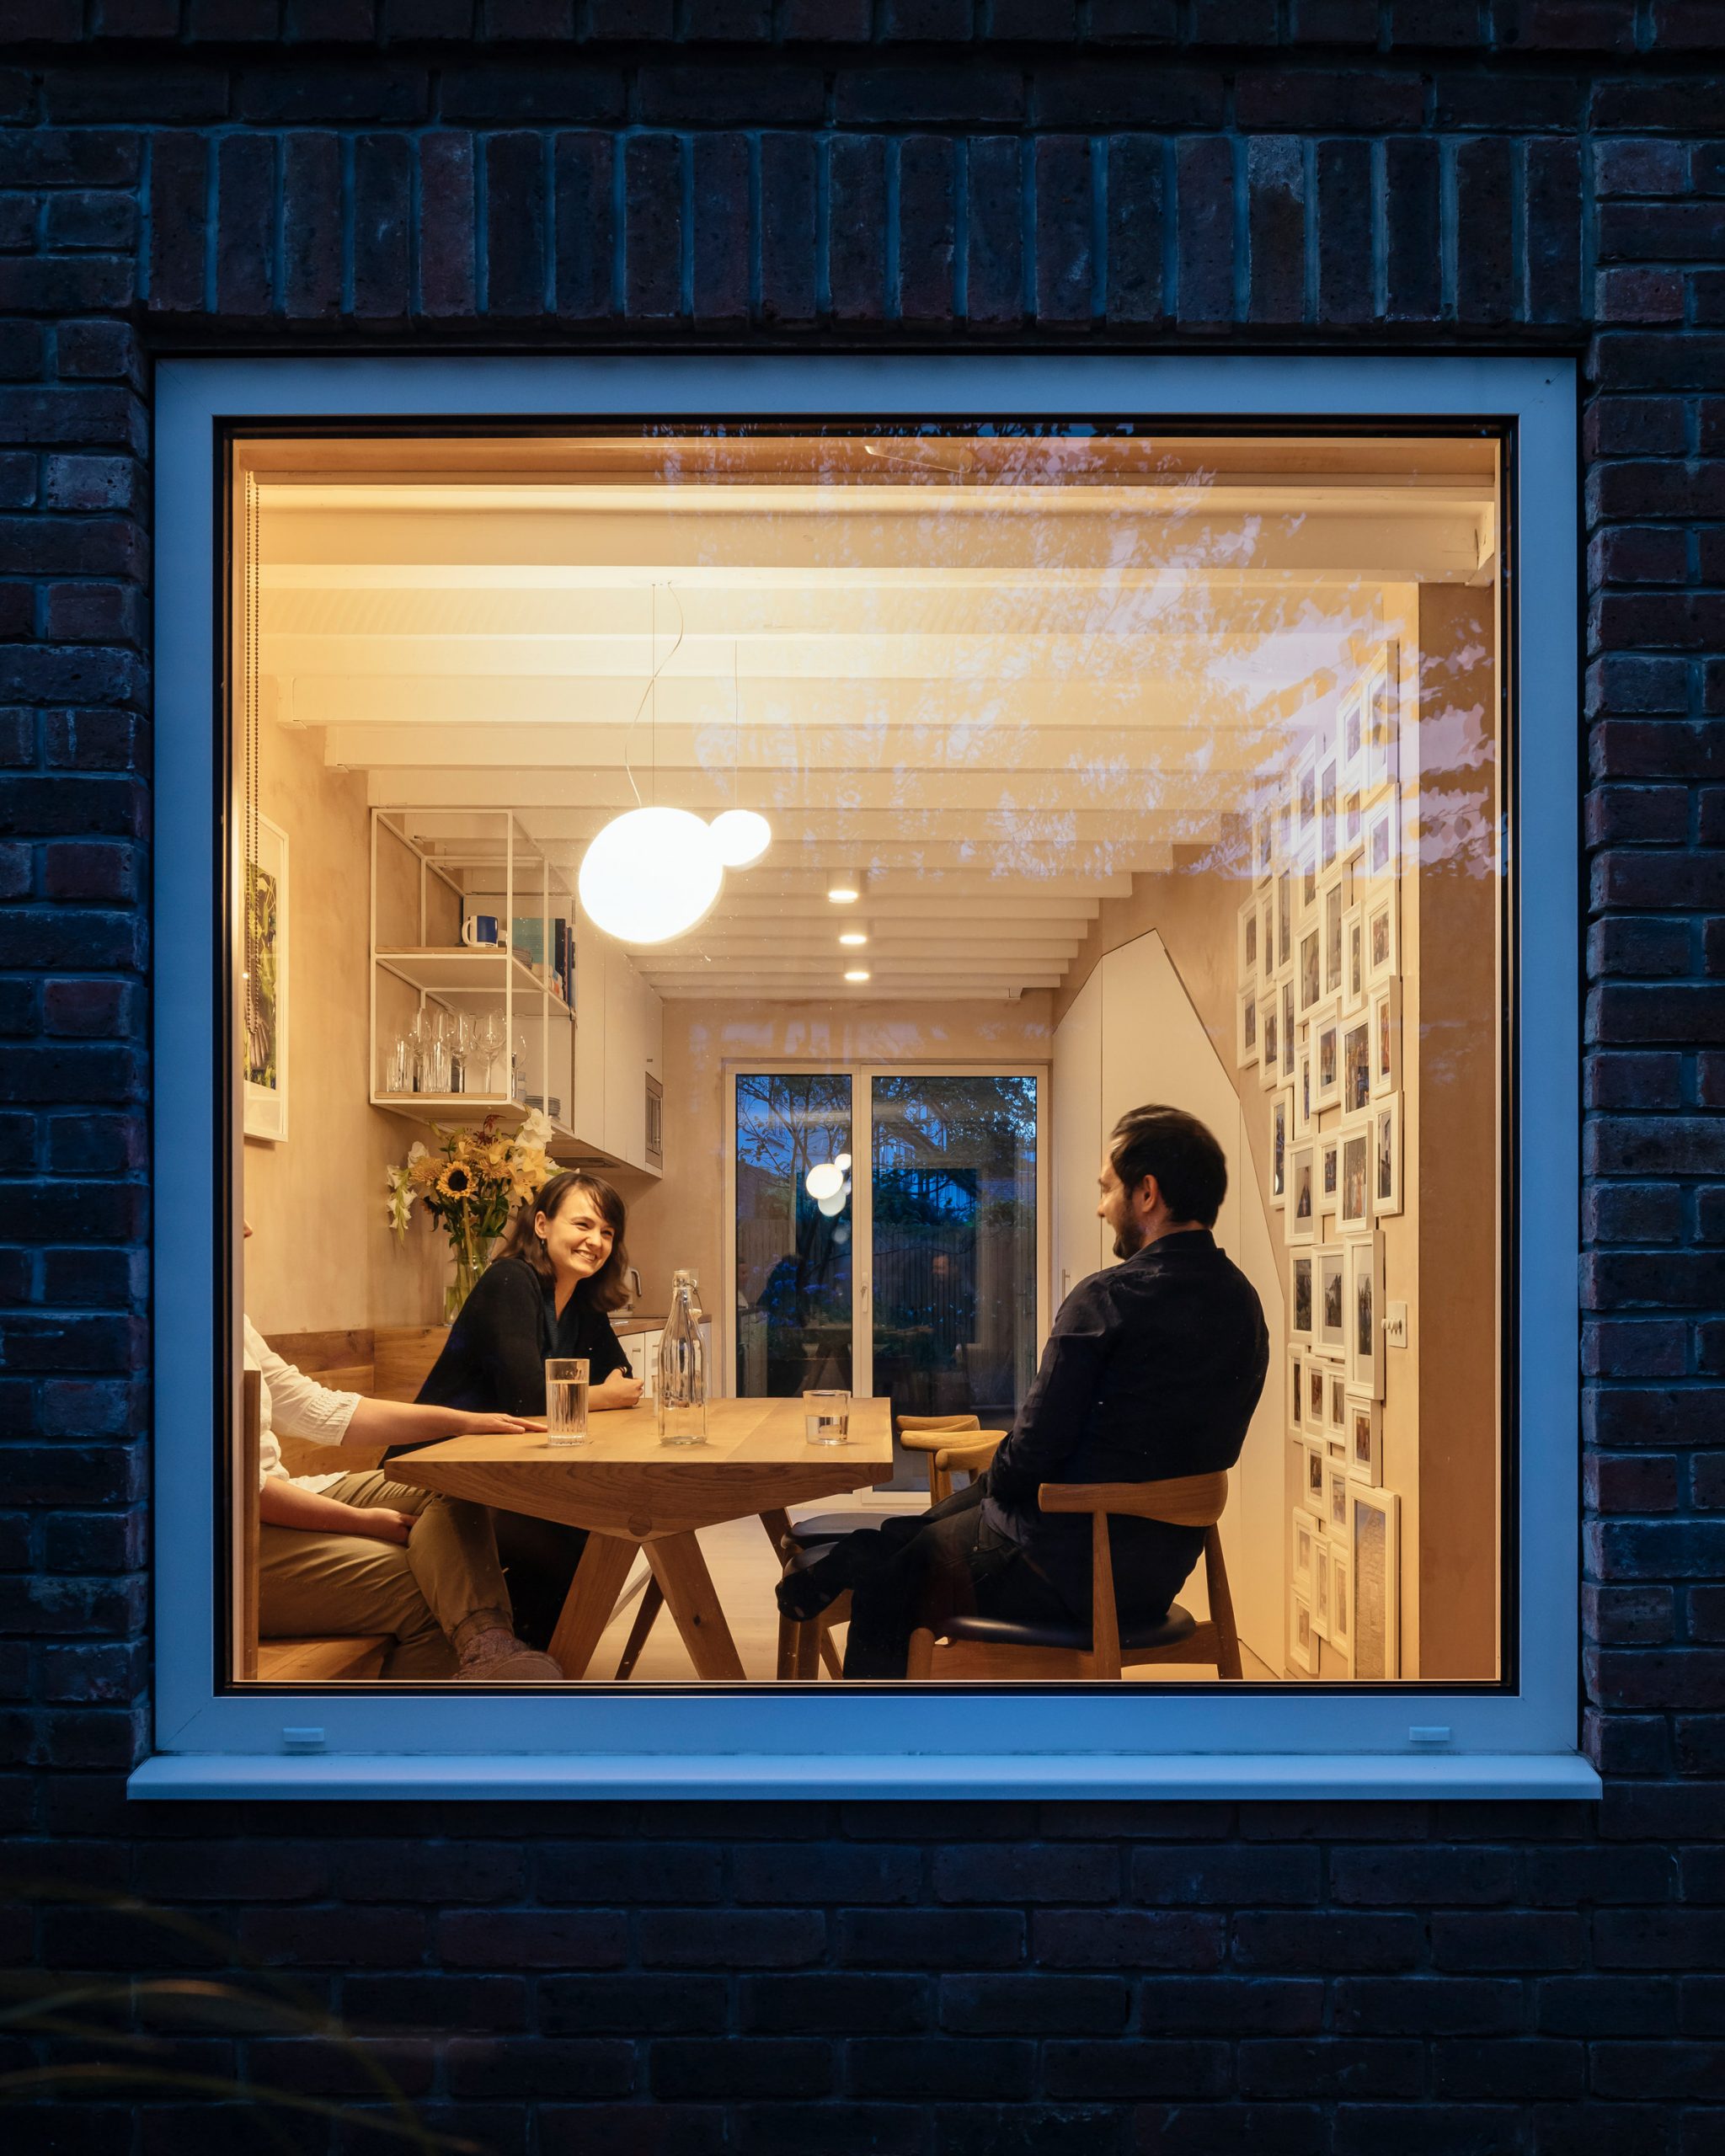 Large square window looking into house with people dining